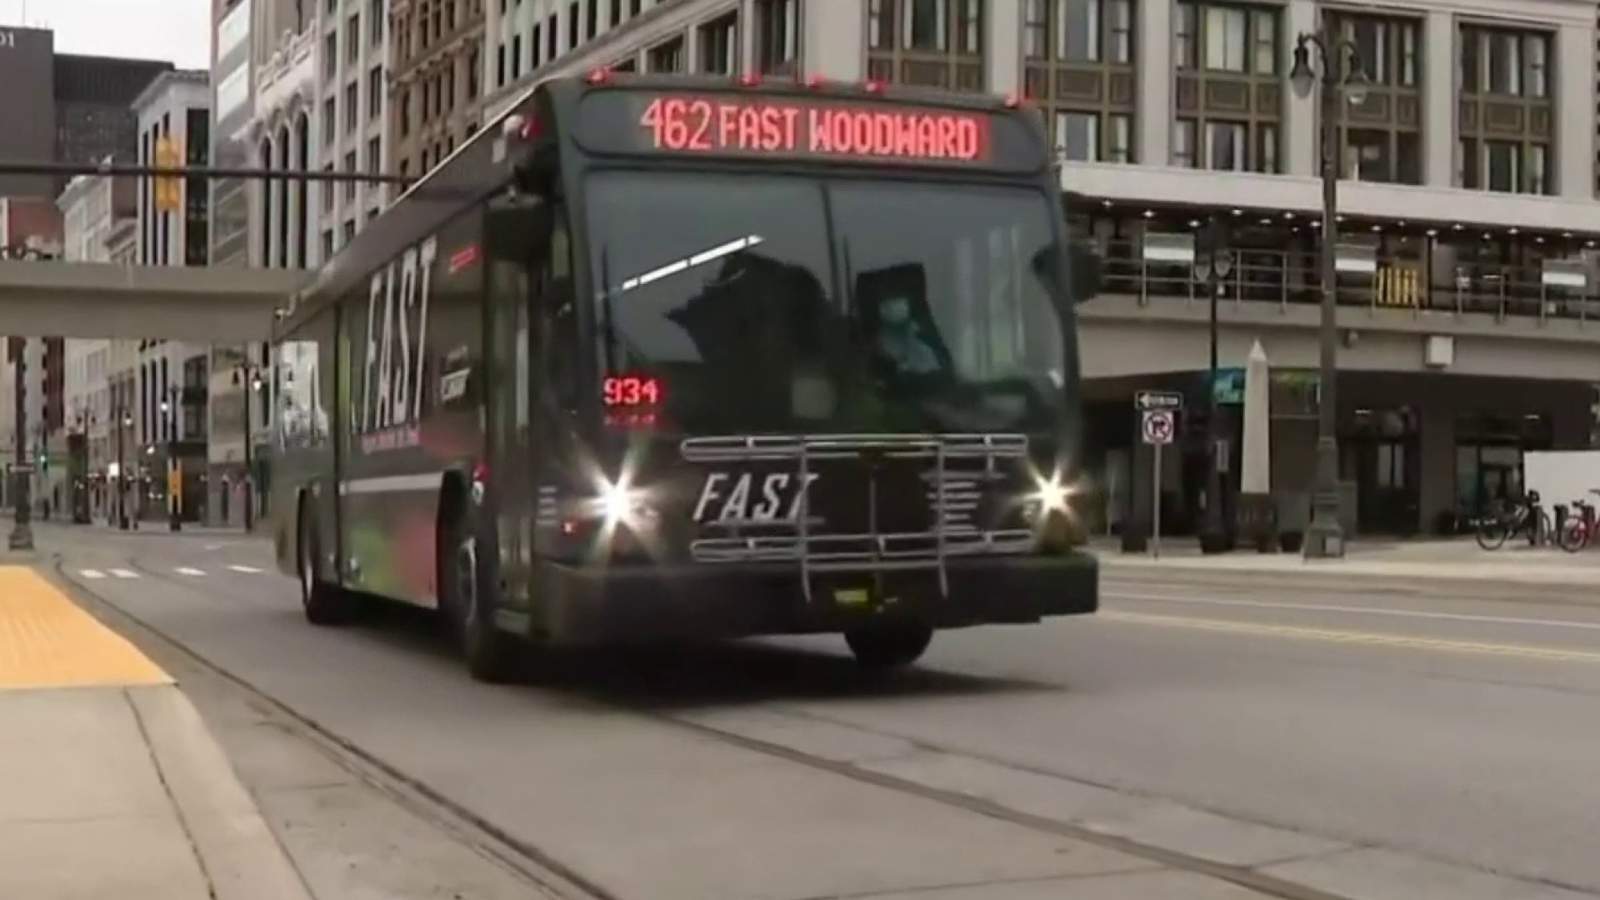 SMART service continues to operate despite DDOT driver work stoppage